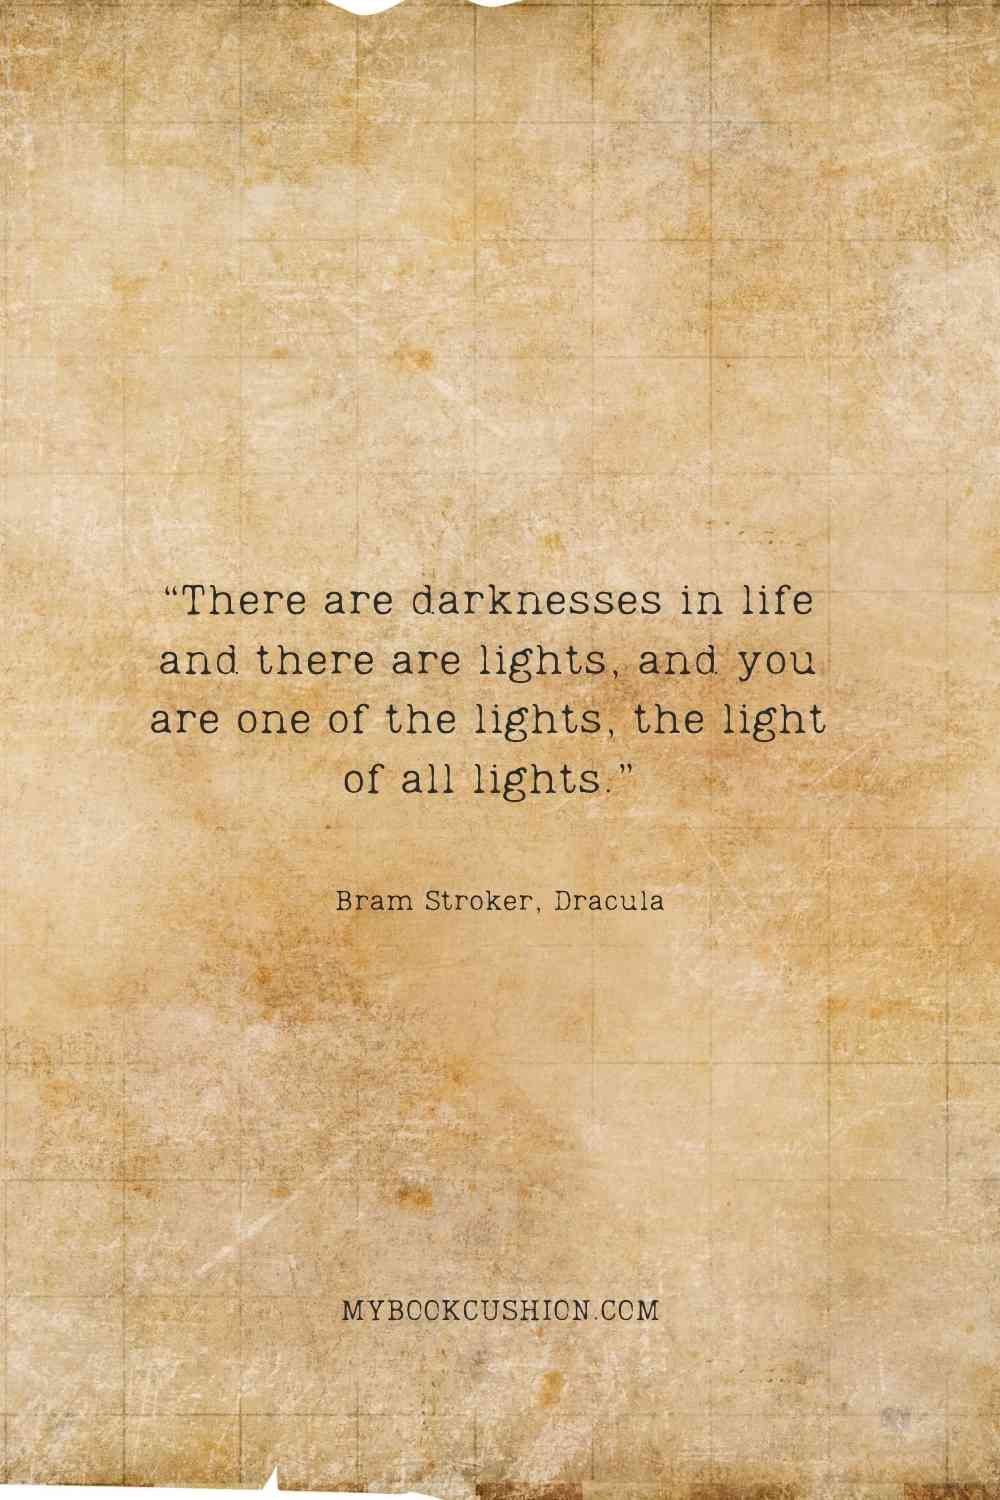 “There are darknesses in life and there are lights, and you are one of the lights, the light of all lights.” - Bram Stroker, Dracula